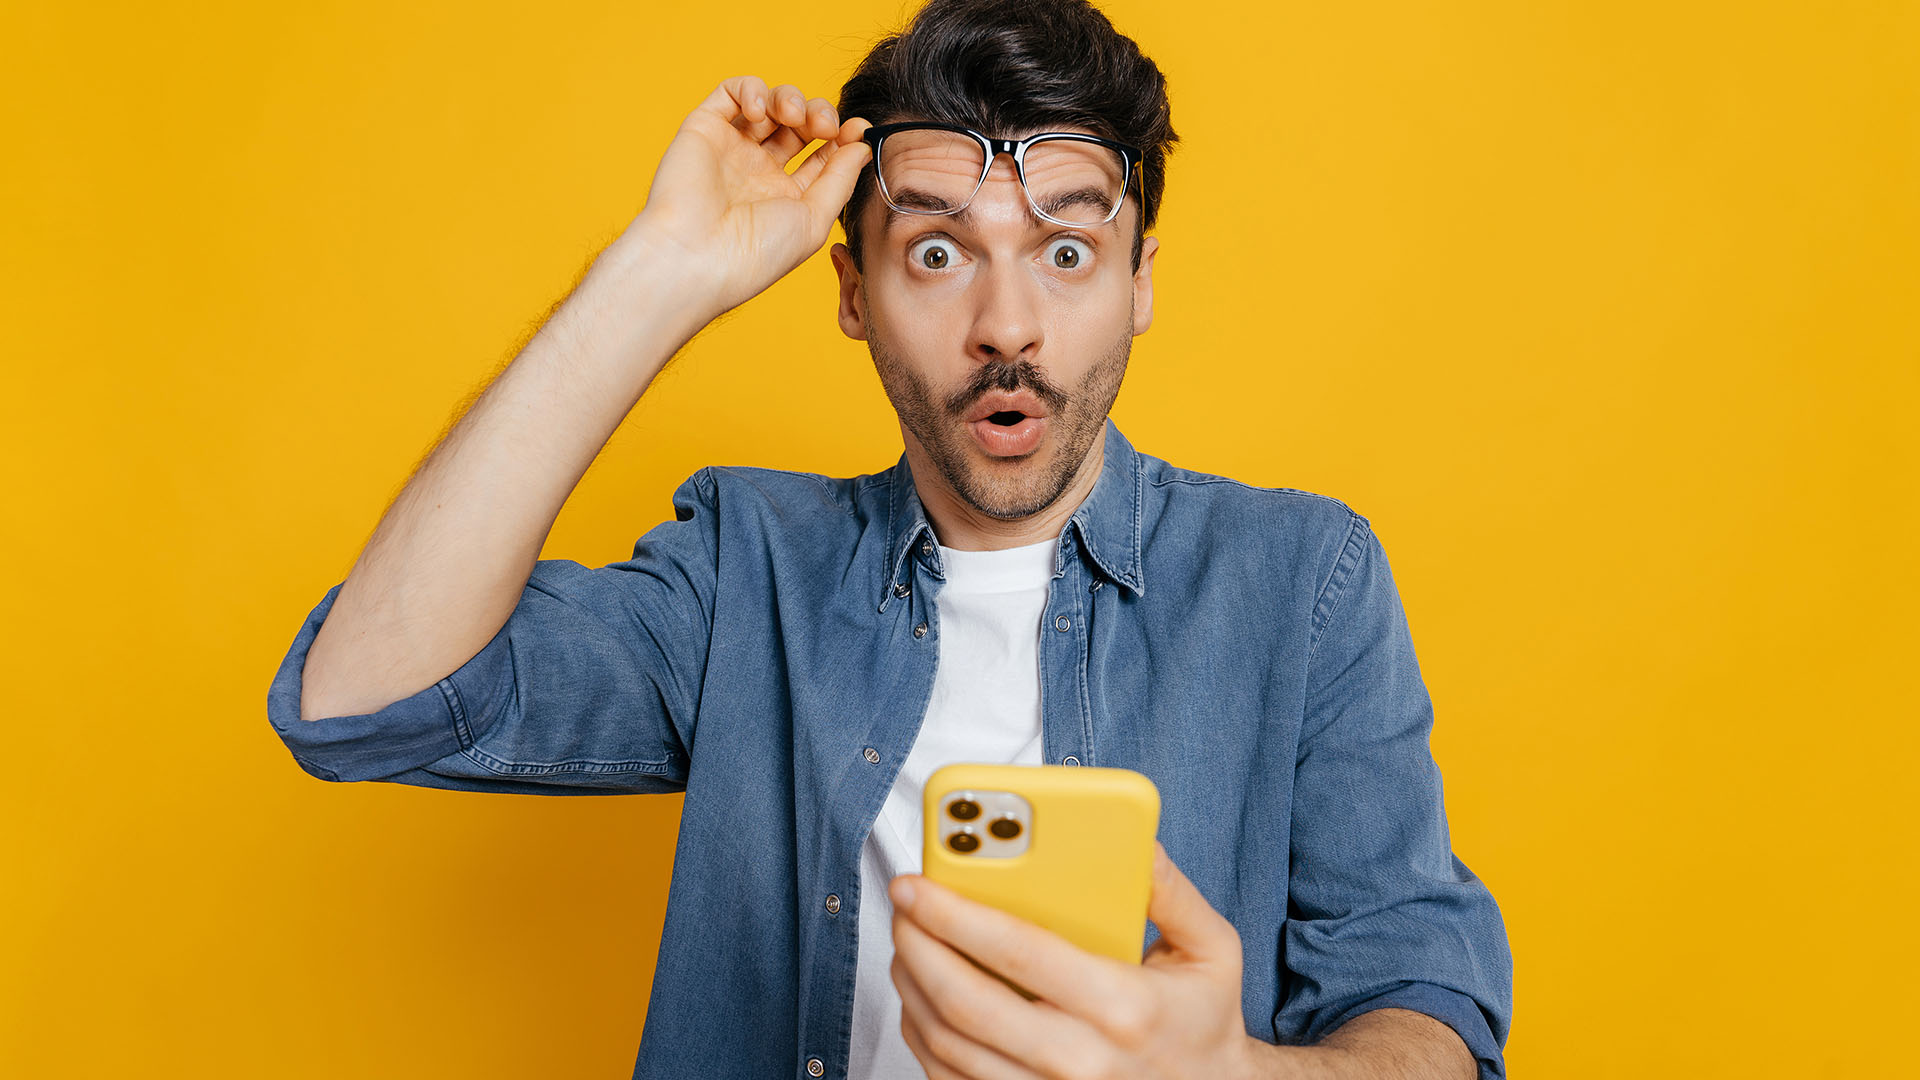 Brunette man in blue jean coat and white shirt looking surprised at his phone. Yellow background.